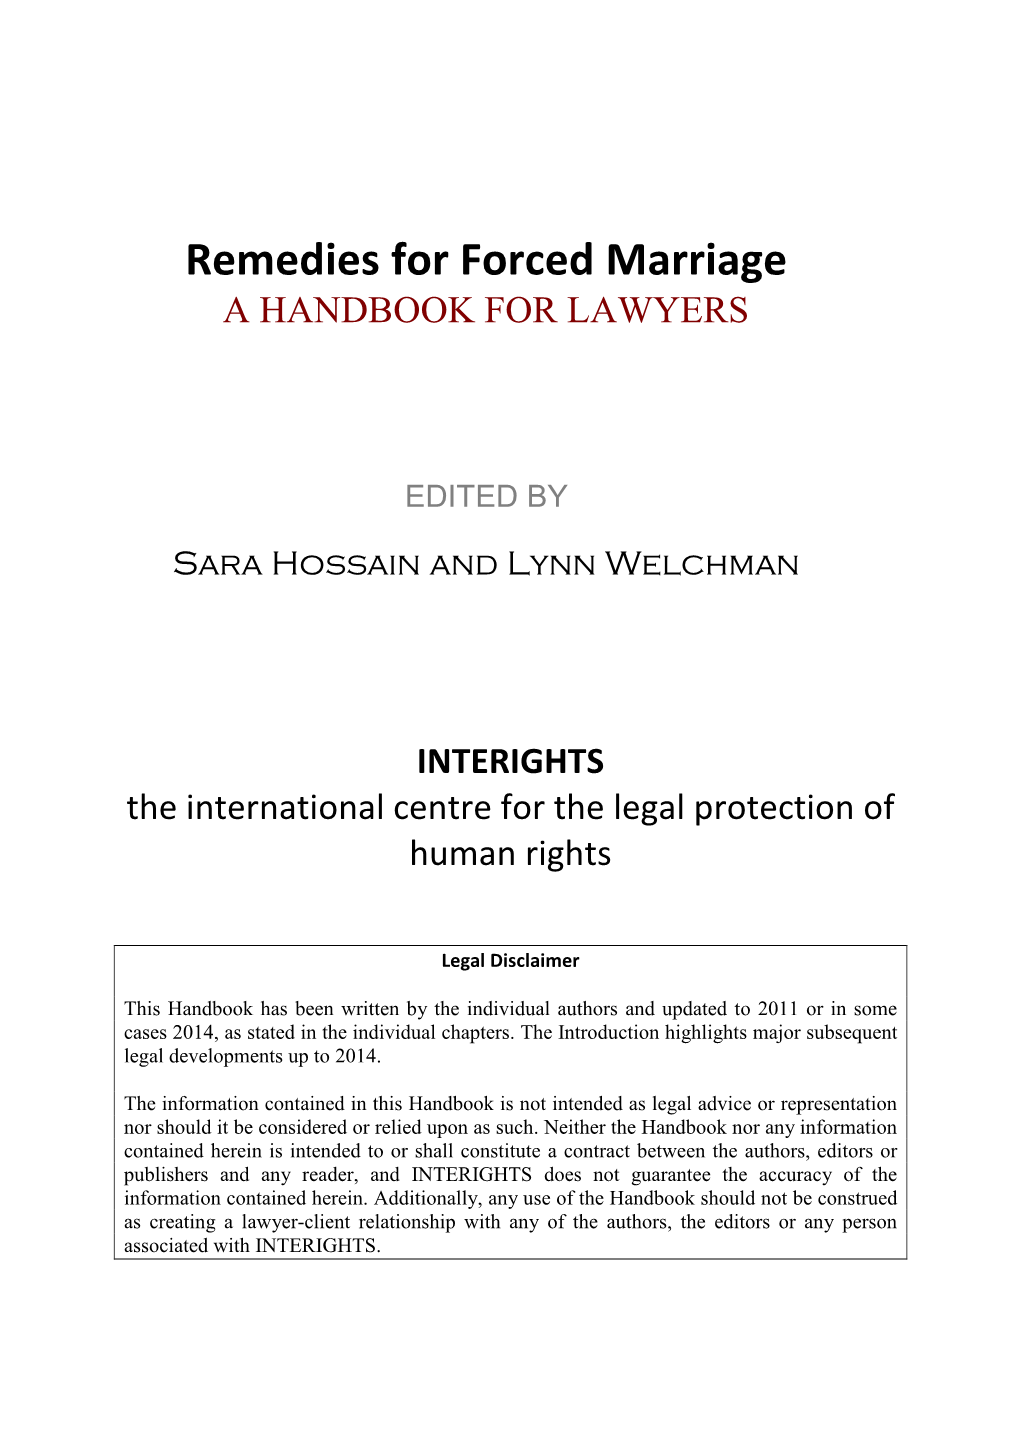 Remedies for Forced Marriage a HANDBOOK for LAWYERS